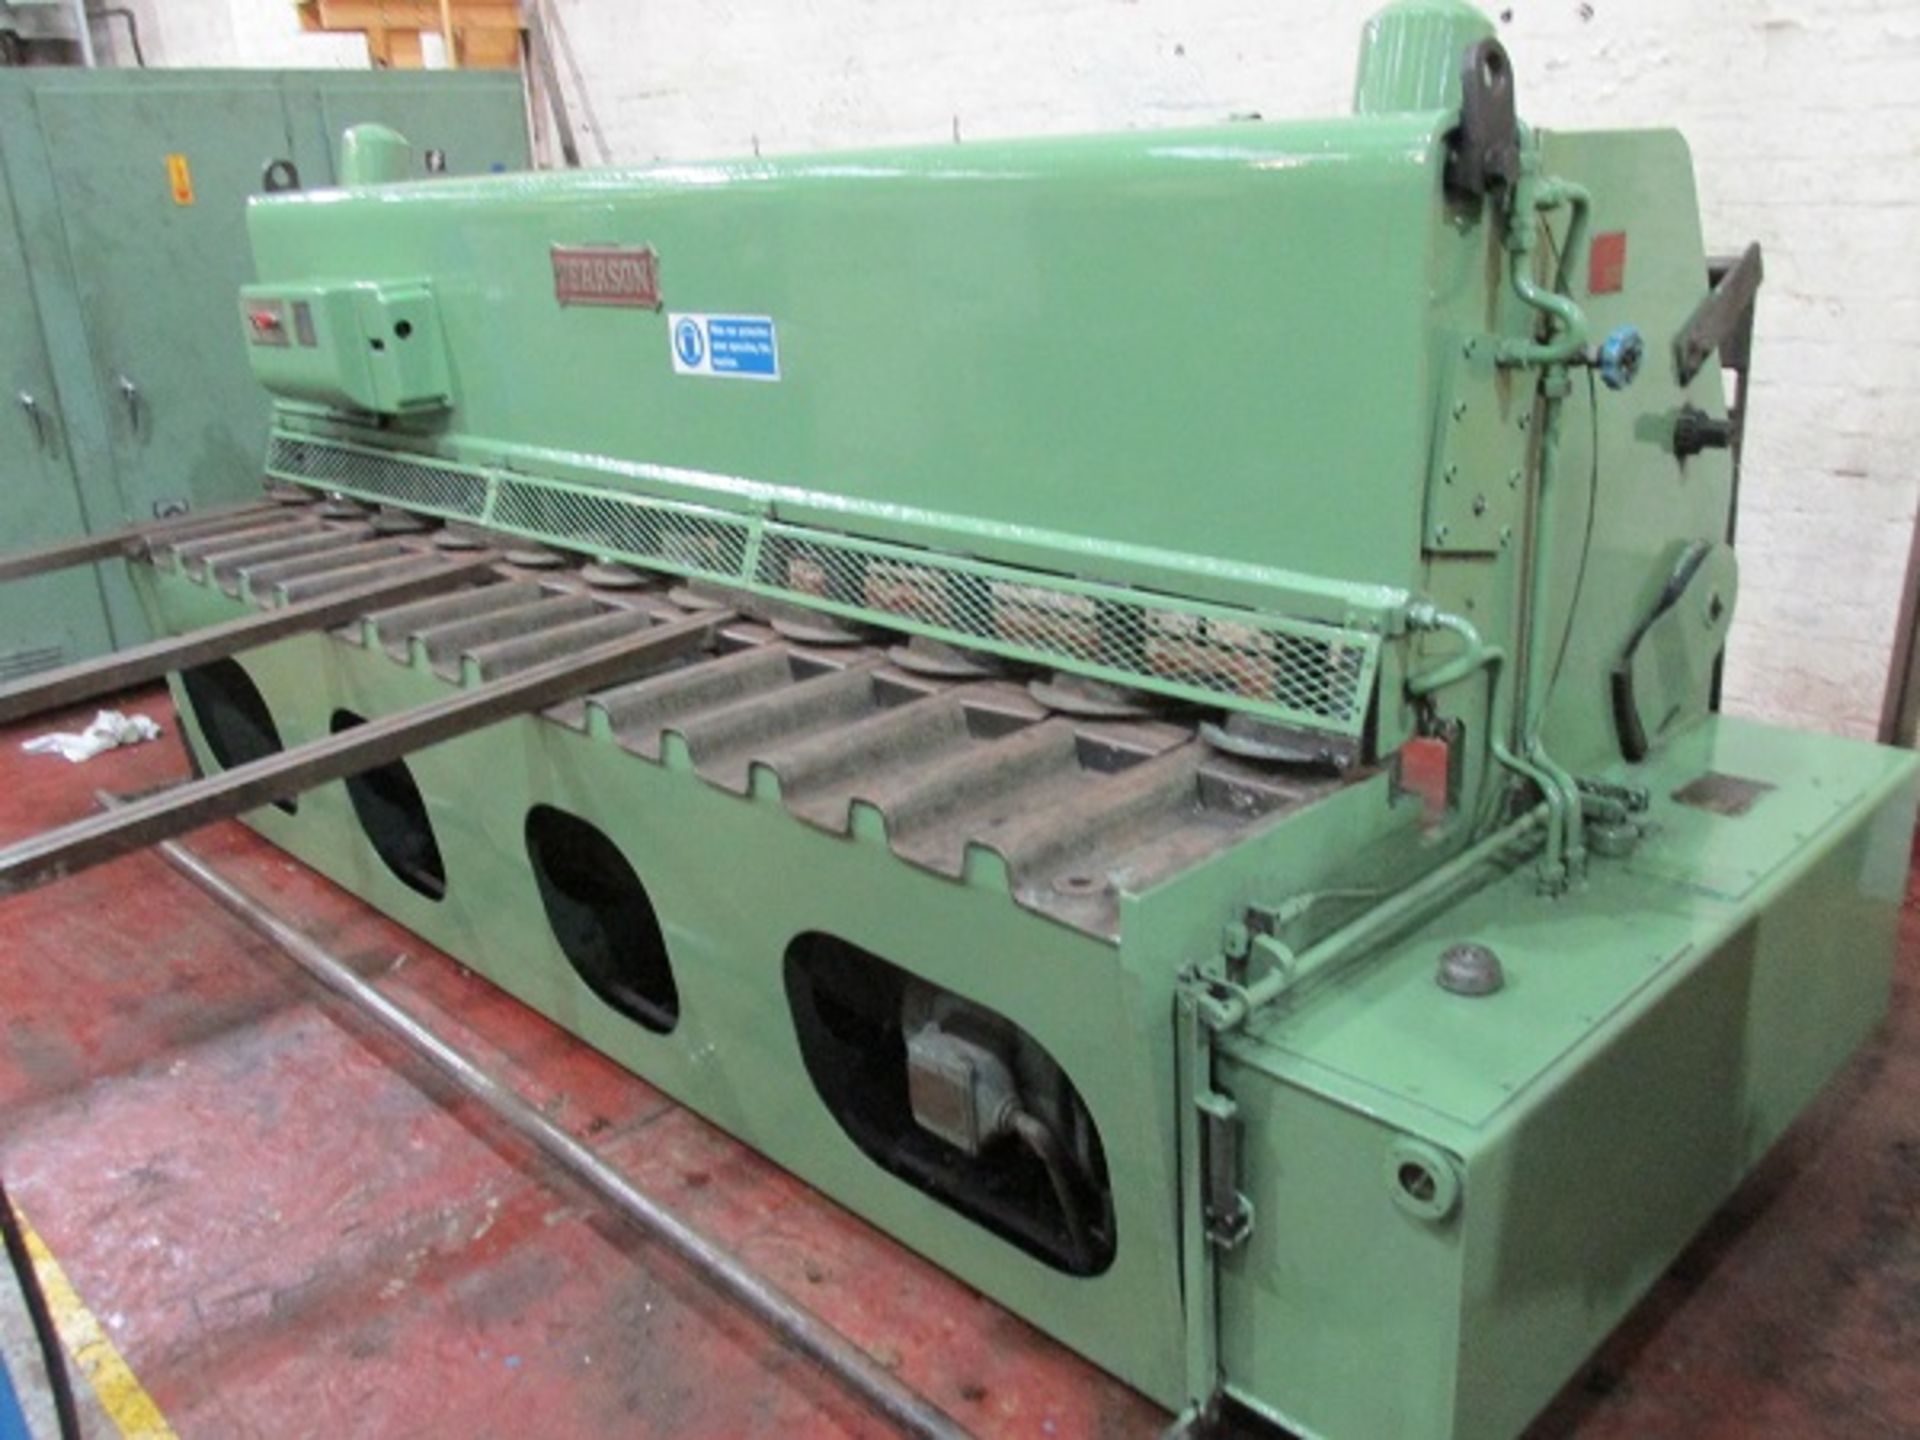 Pearson 3000 x 6mm Hydraulic Guillotine - Image 4 of 9